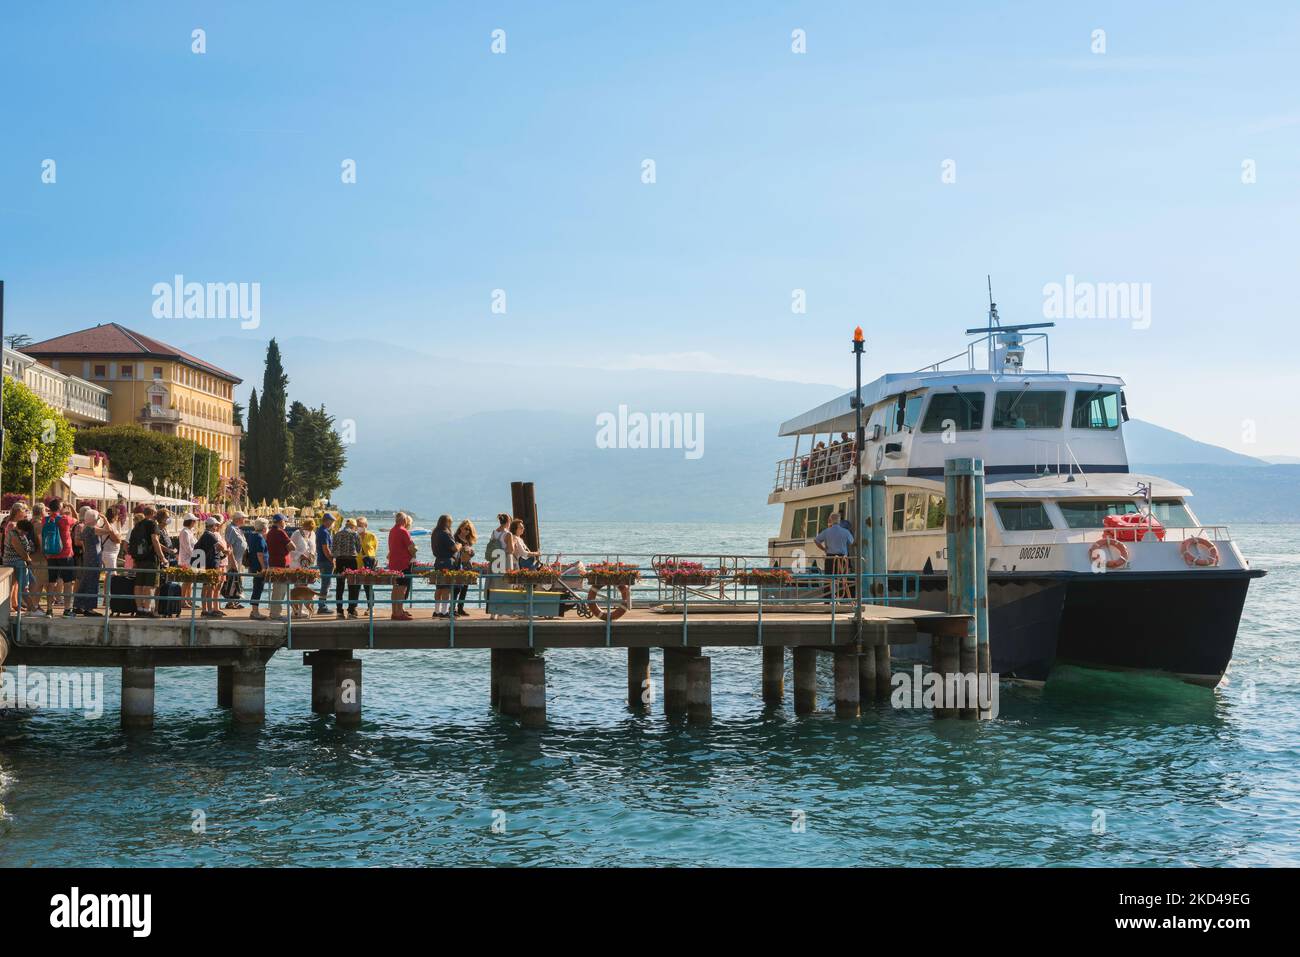 Ferry Lake Garda, view in summer of people standing on the ferry station jetty waiting to board a ferry boat in Gardone Riviera, Lombardy, Italy Stock Photo